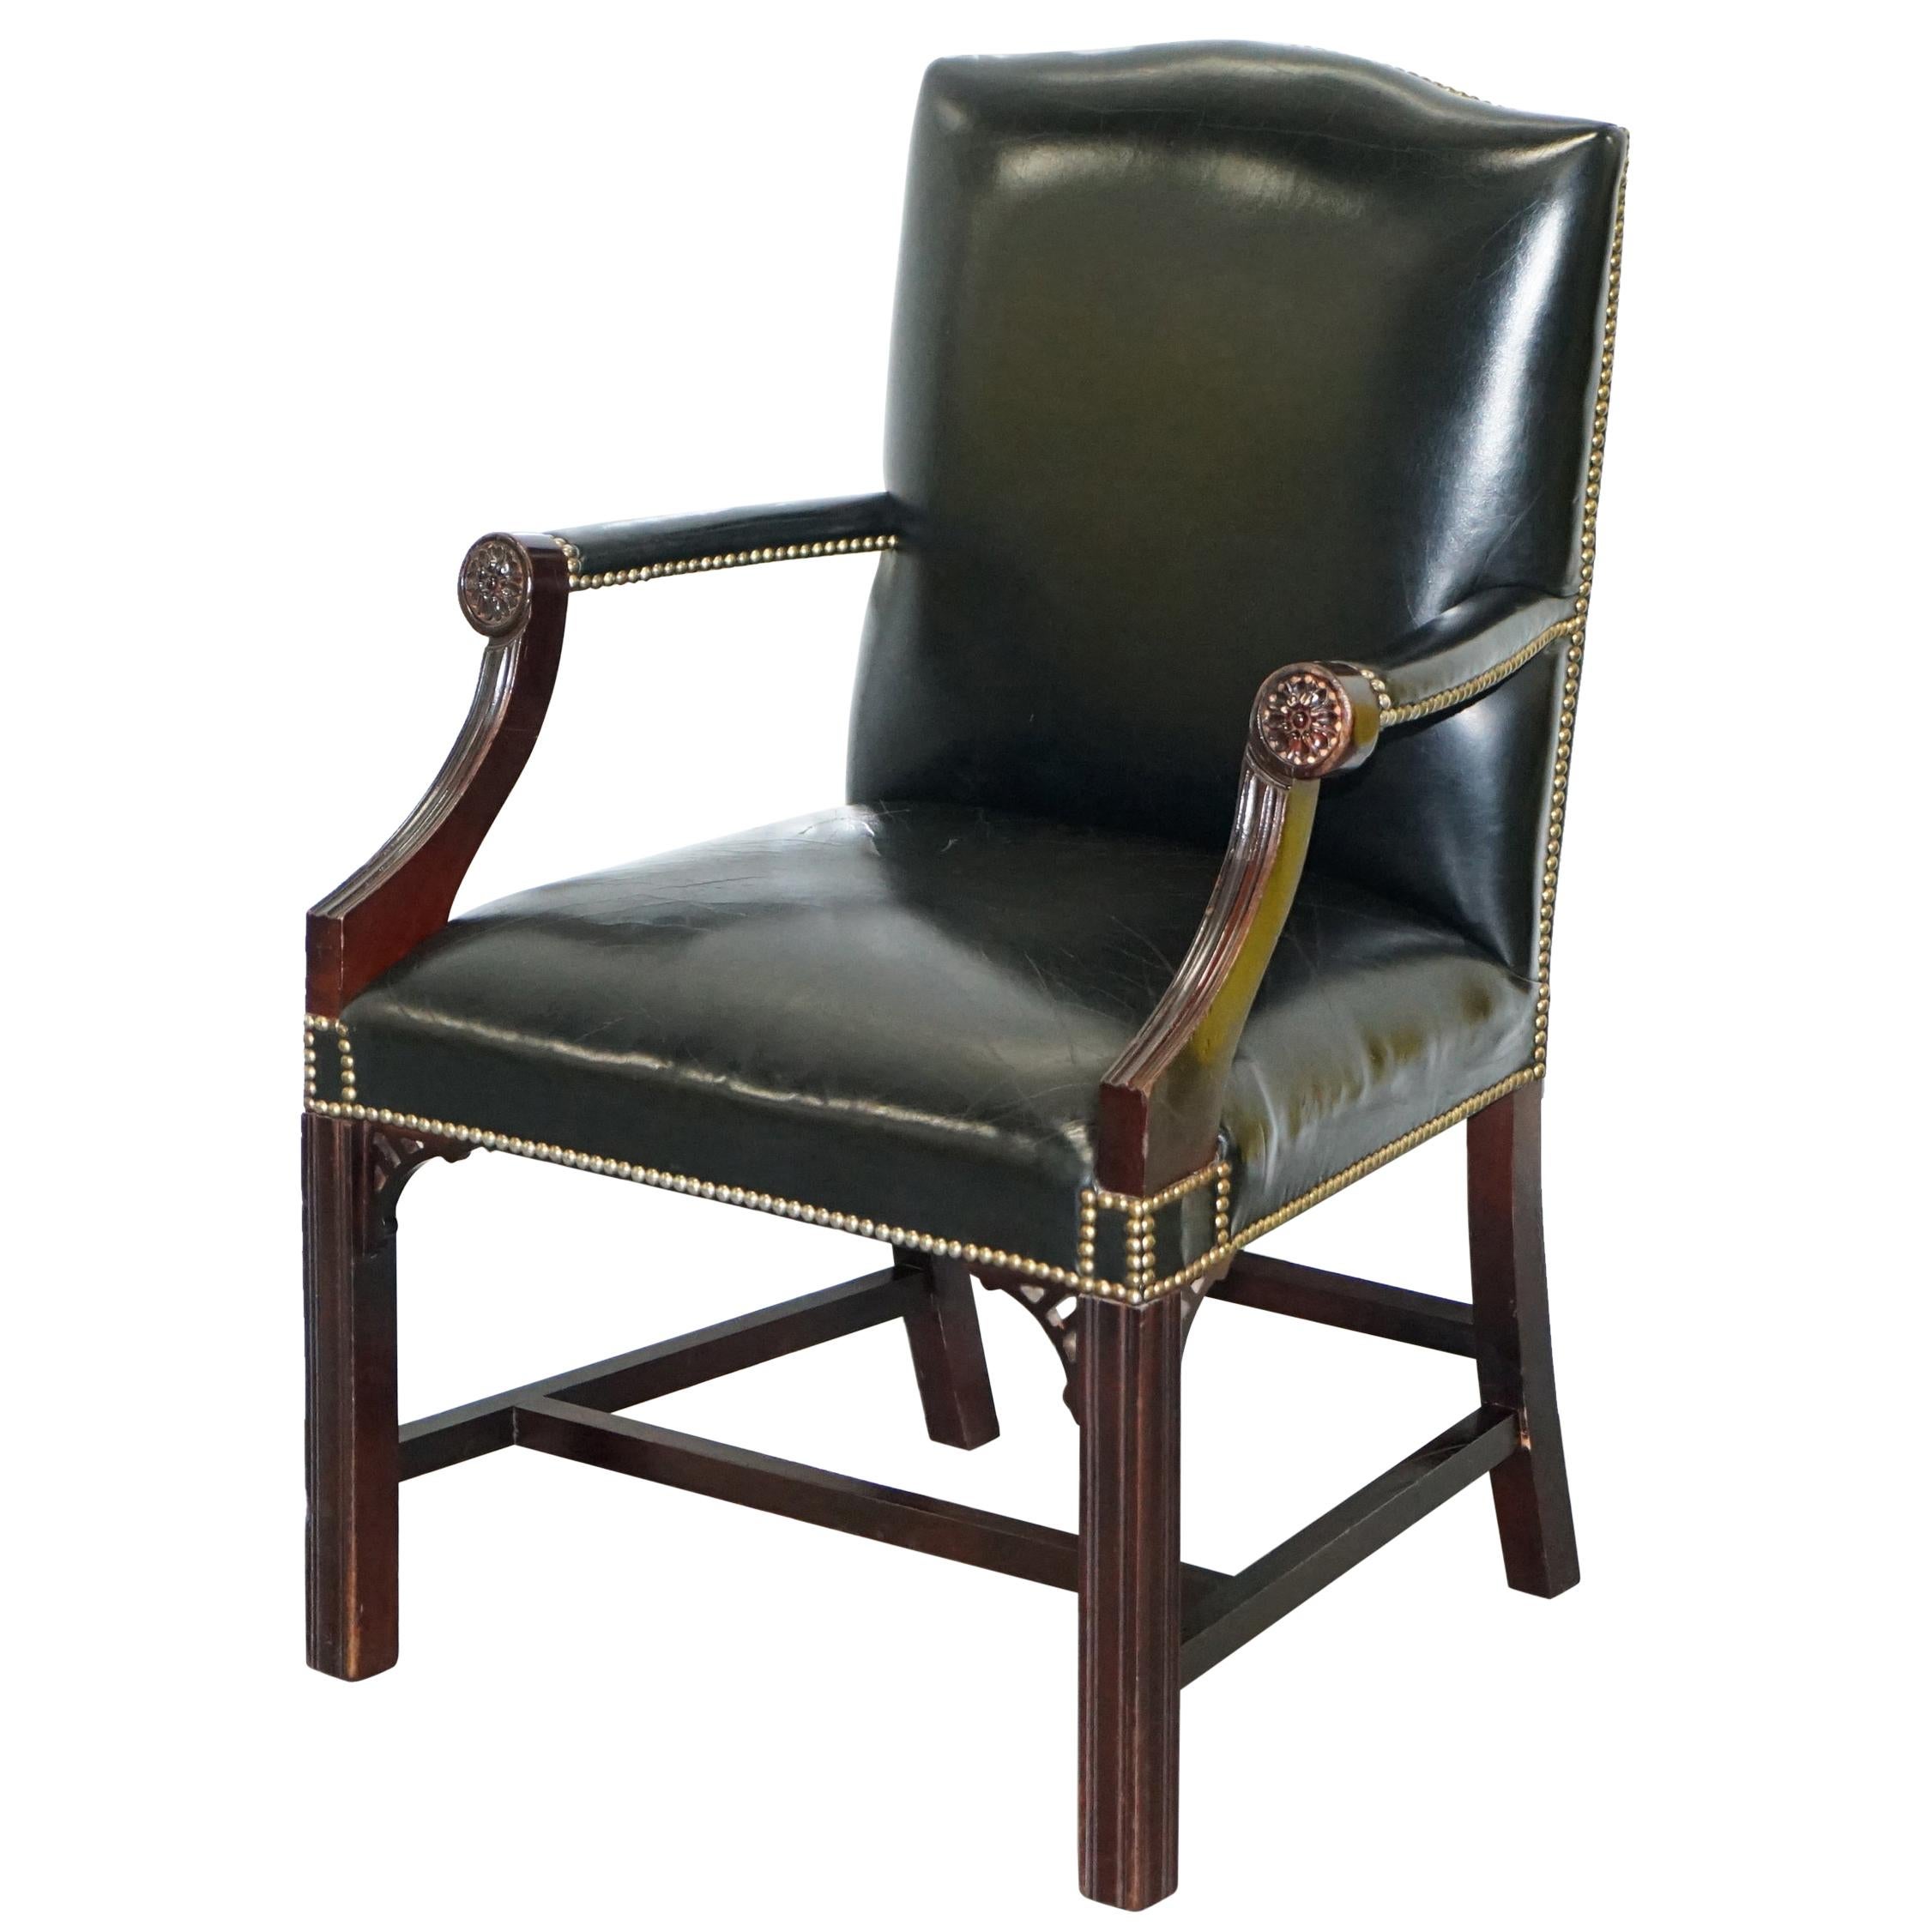 Stunning Black Leather Thomas Chippendale Style Gainsborough Carver Armchair